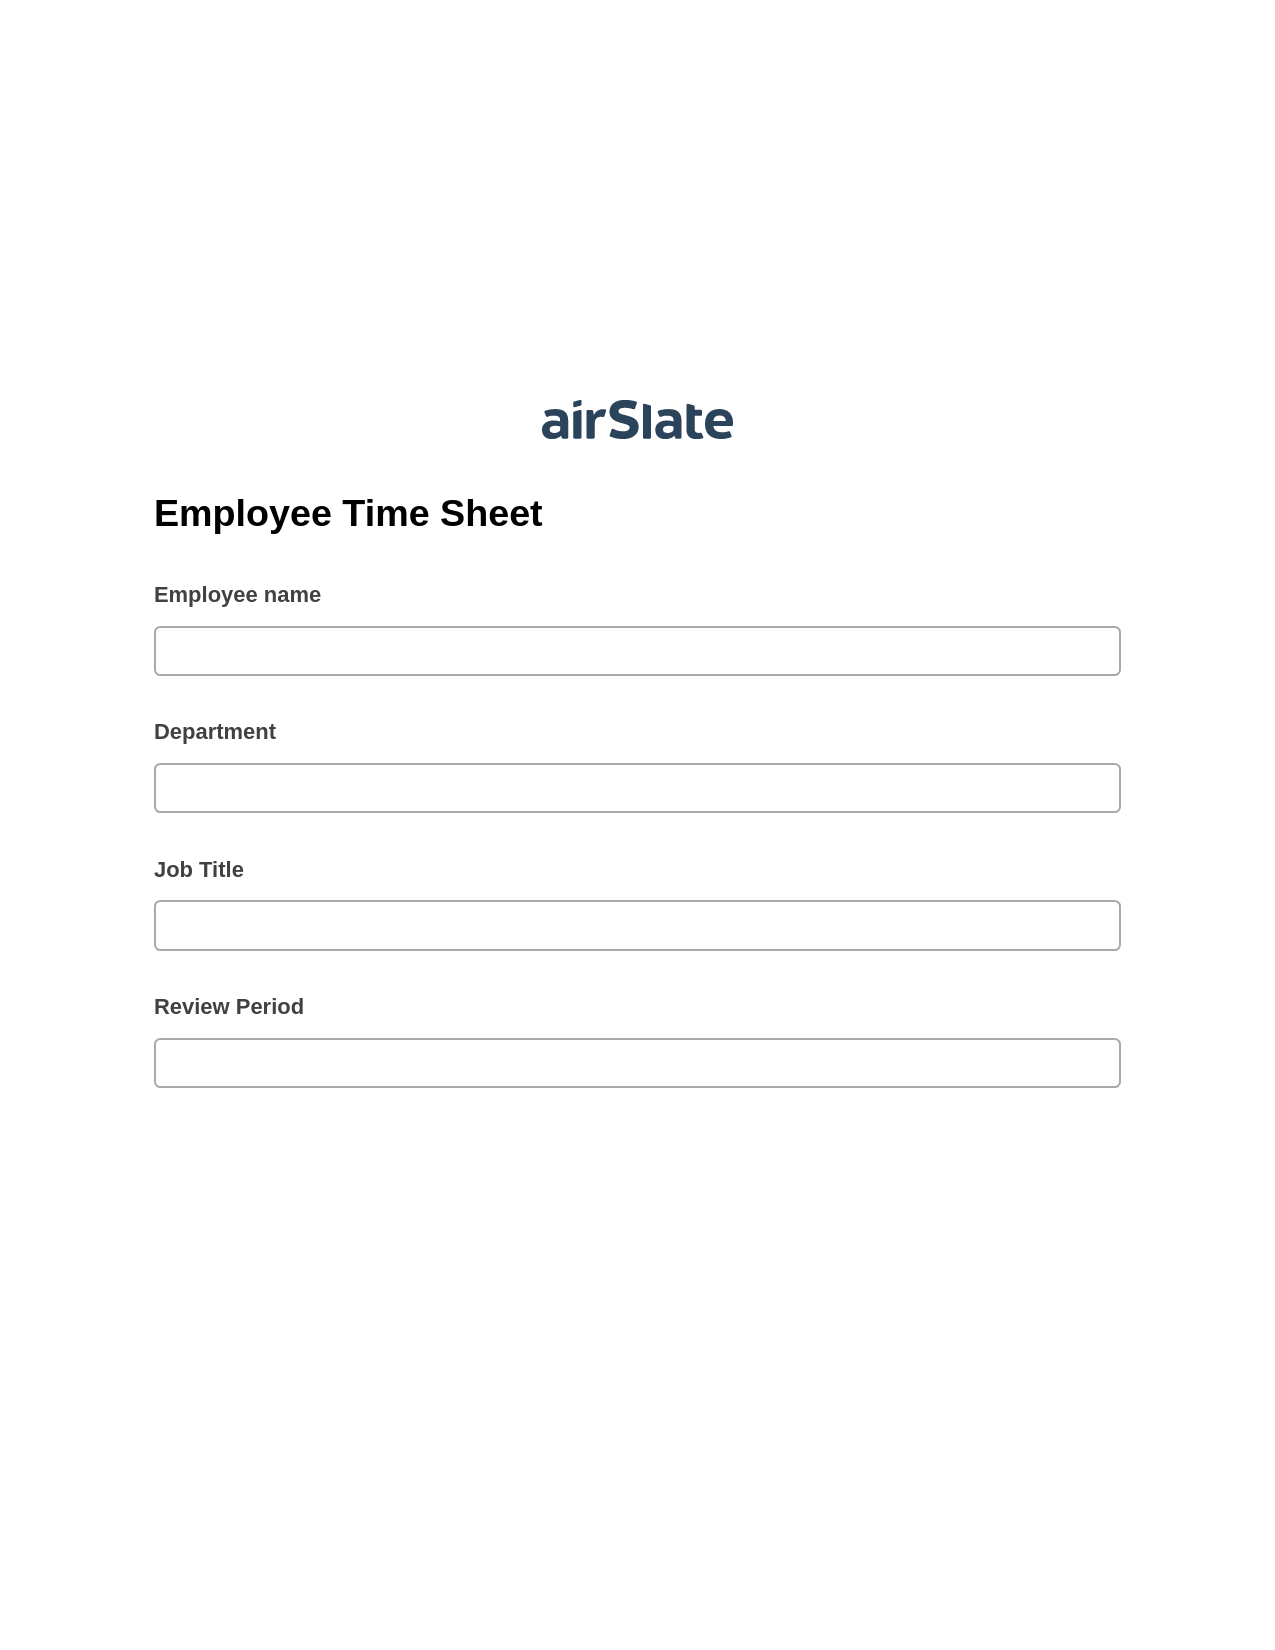 Employee Time Sheet Pre-fill from Salesforce Records Bot, Custom Field's Value Bot, Export to MySQL Bot